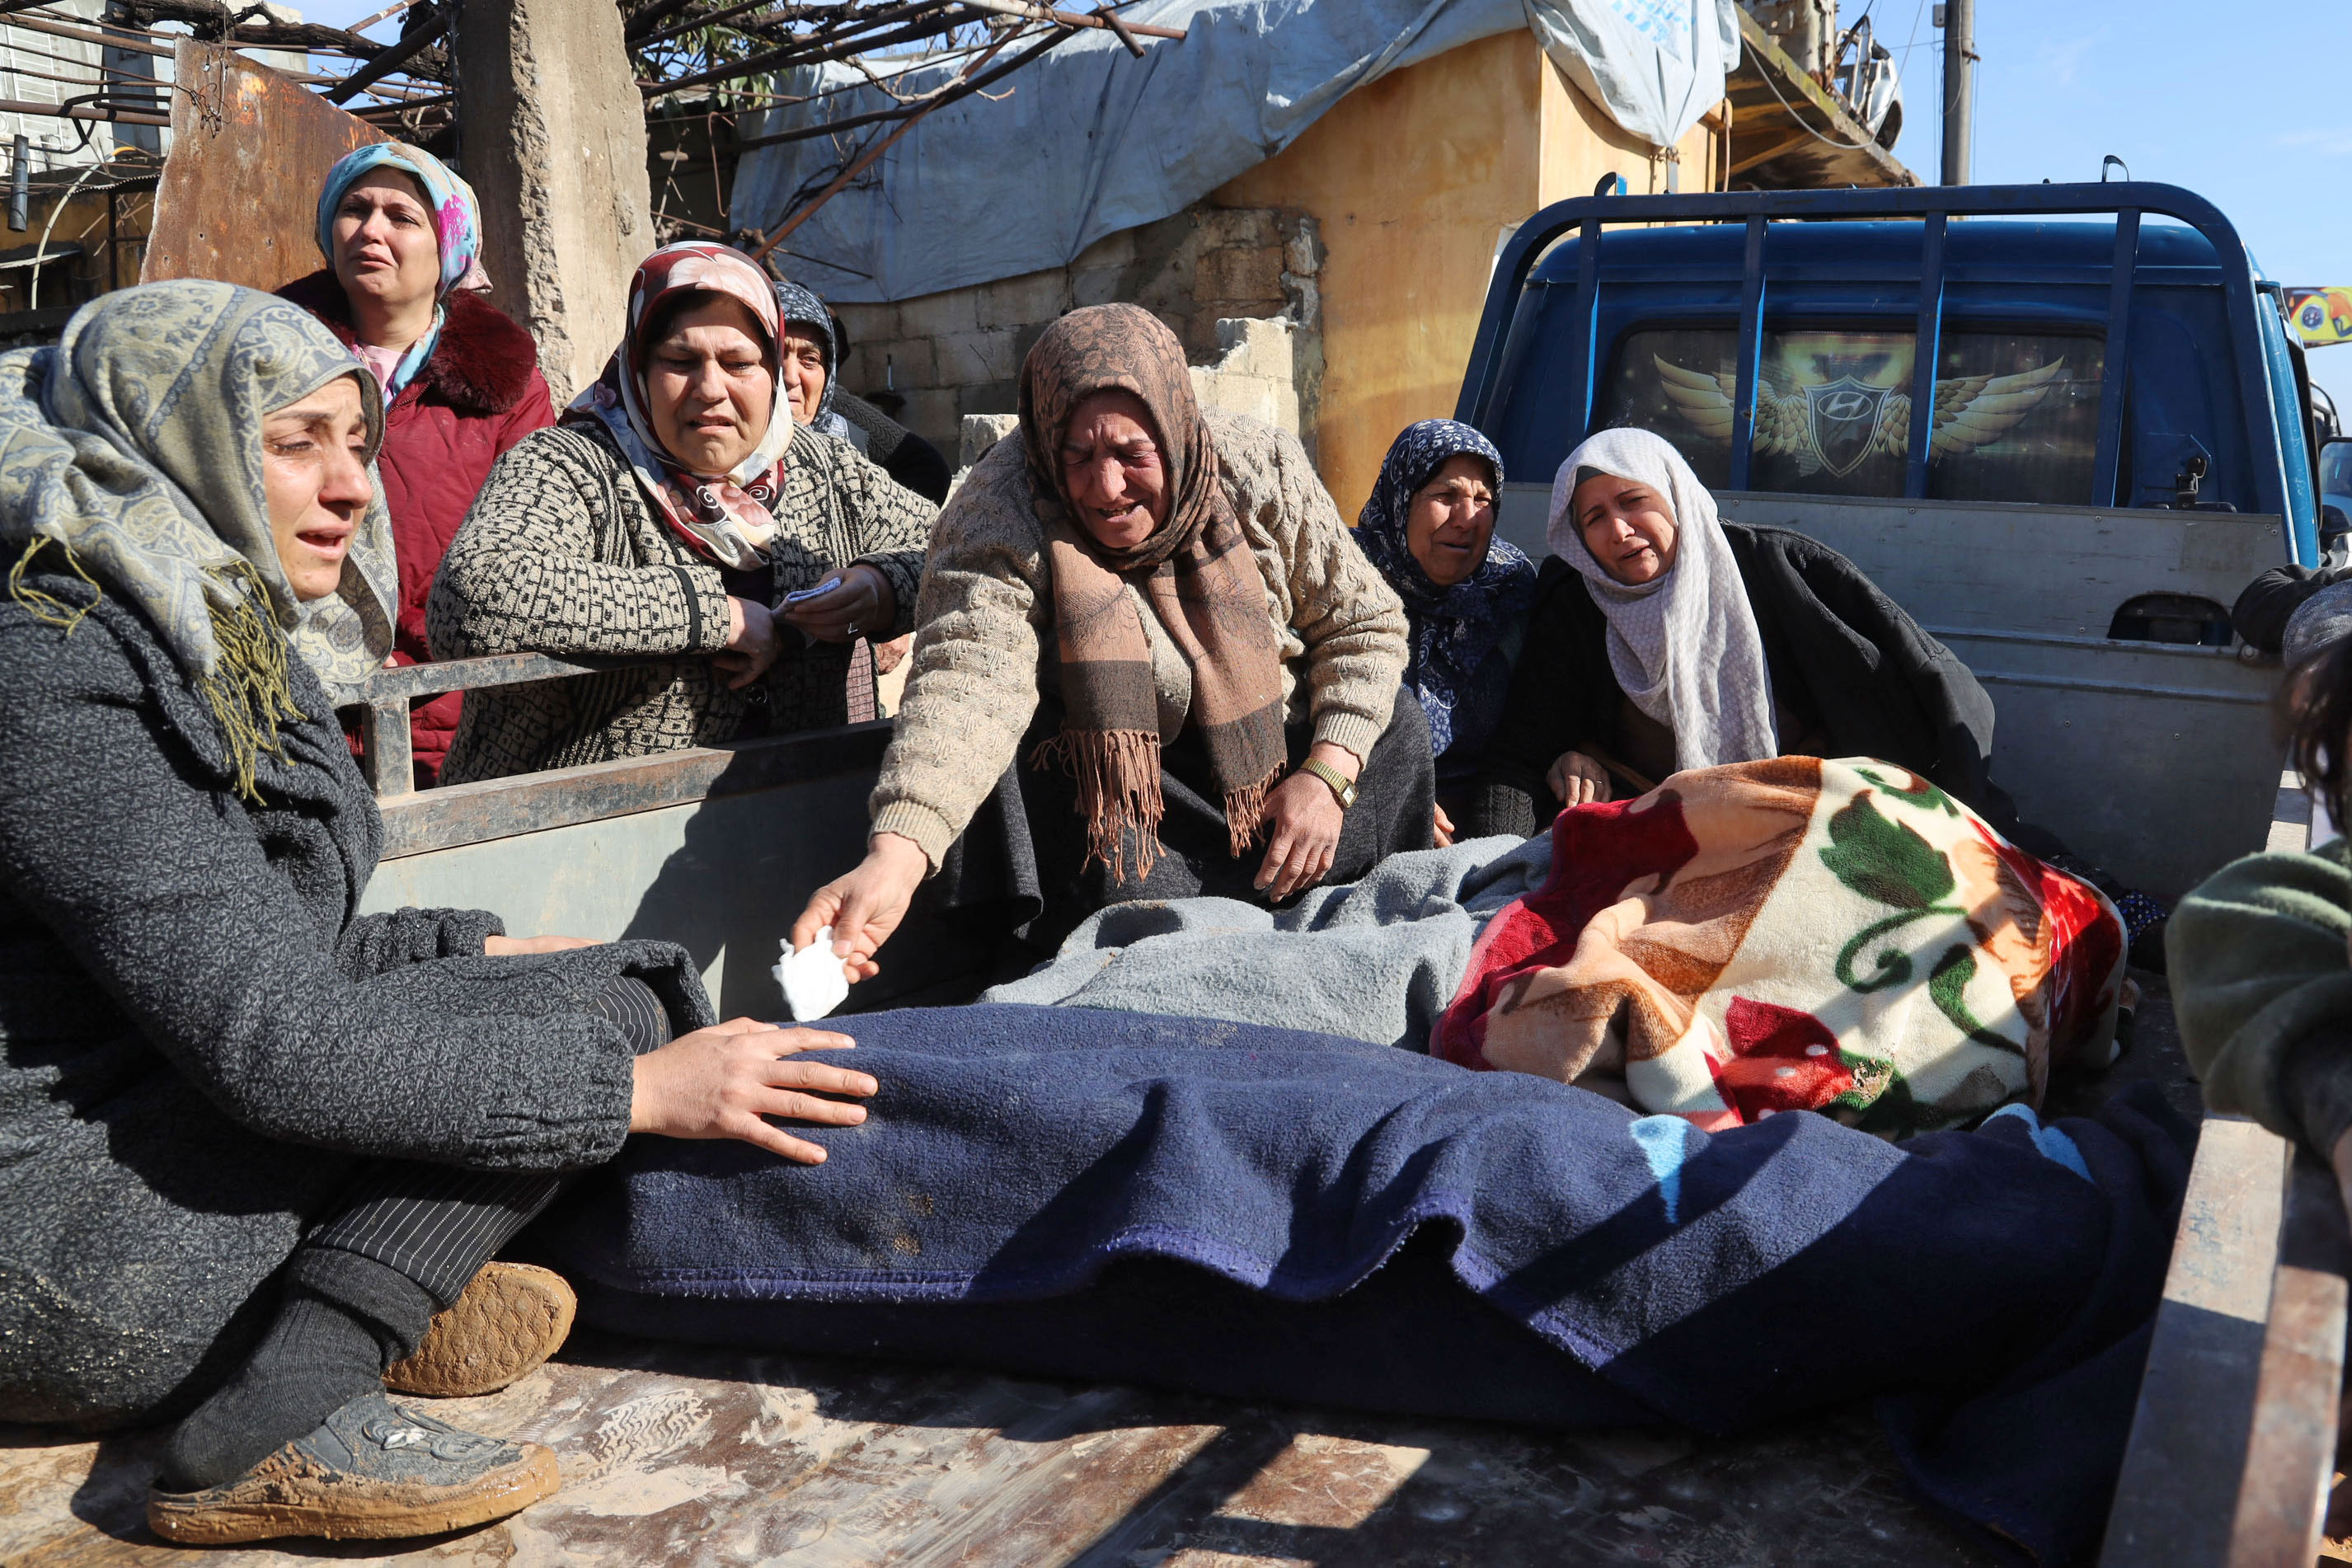 Women mourn next to bodies on the back of a truck in Jandaris, Syria, on Tuesday.